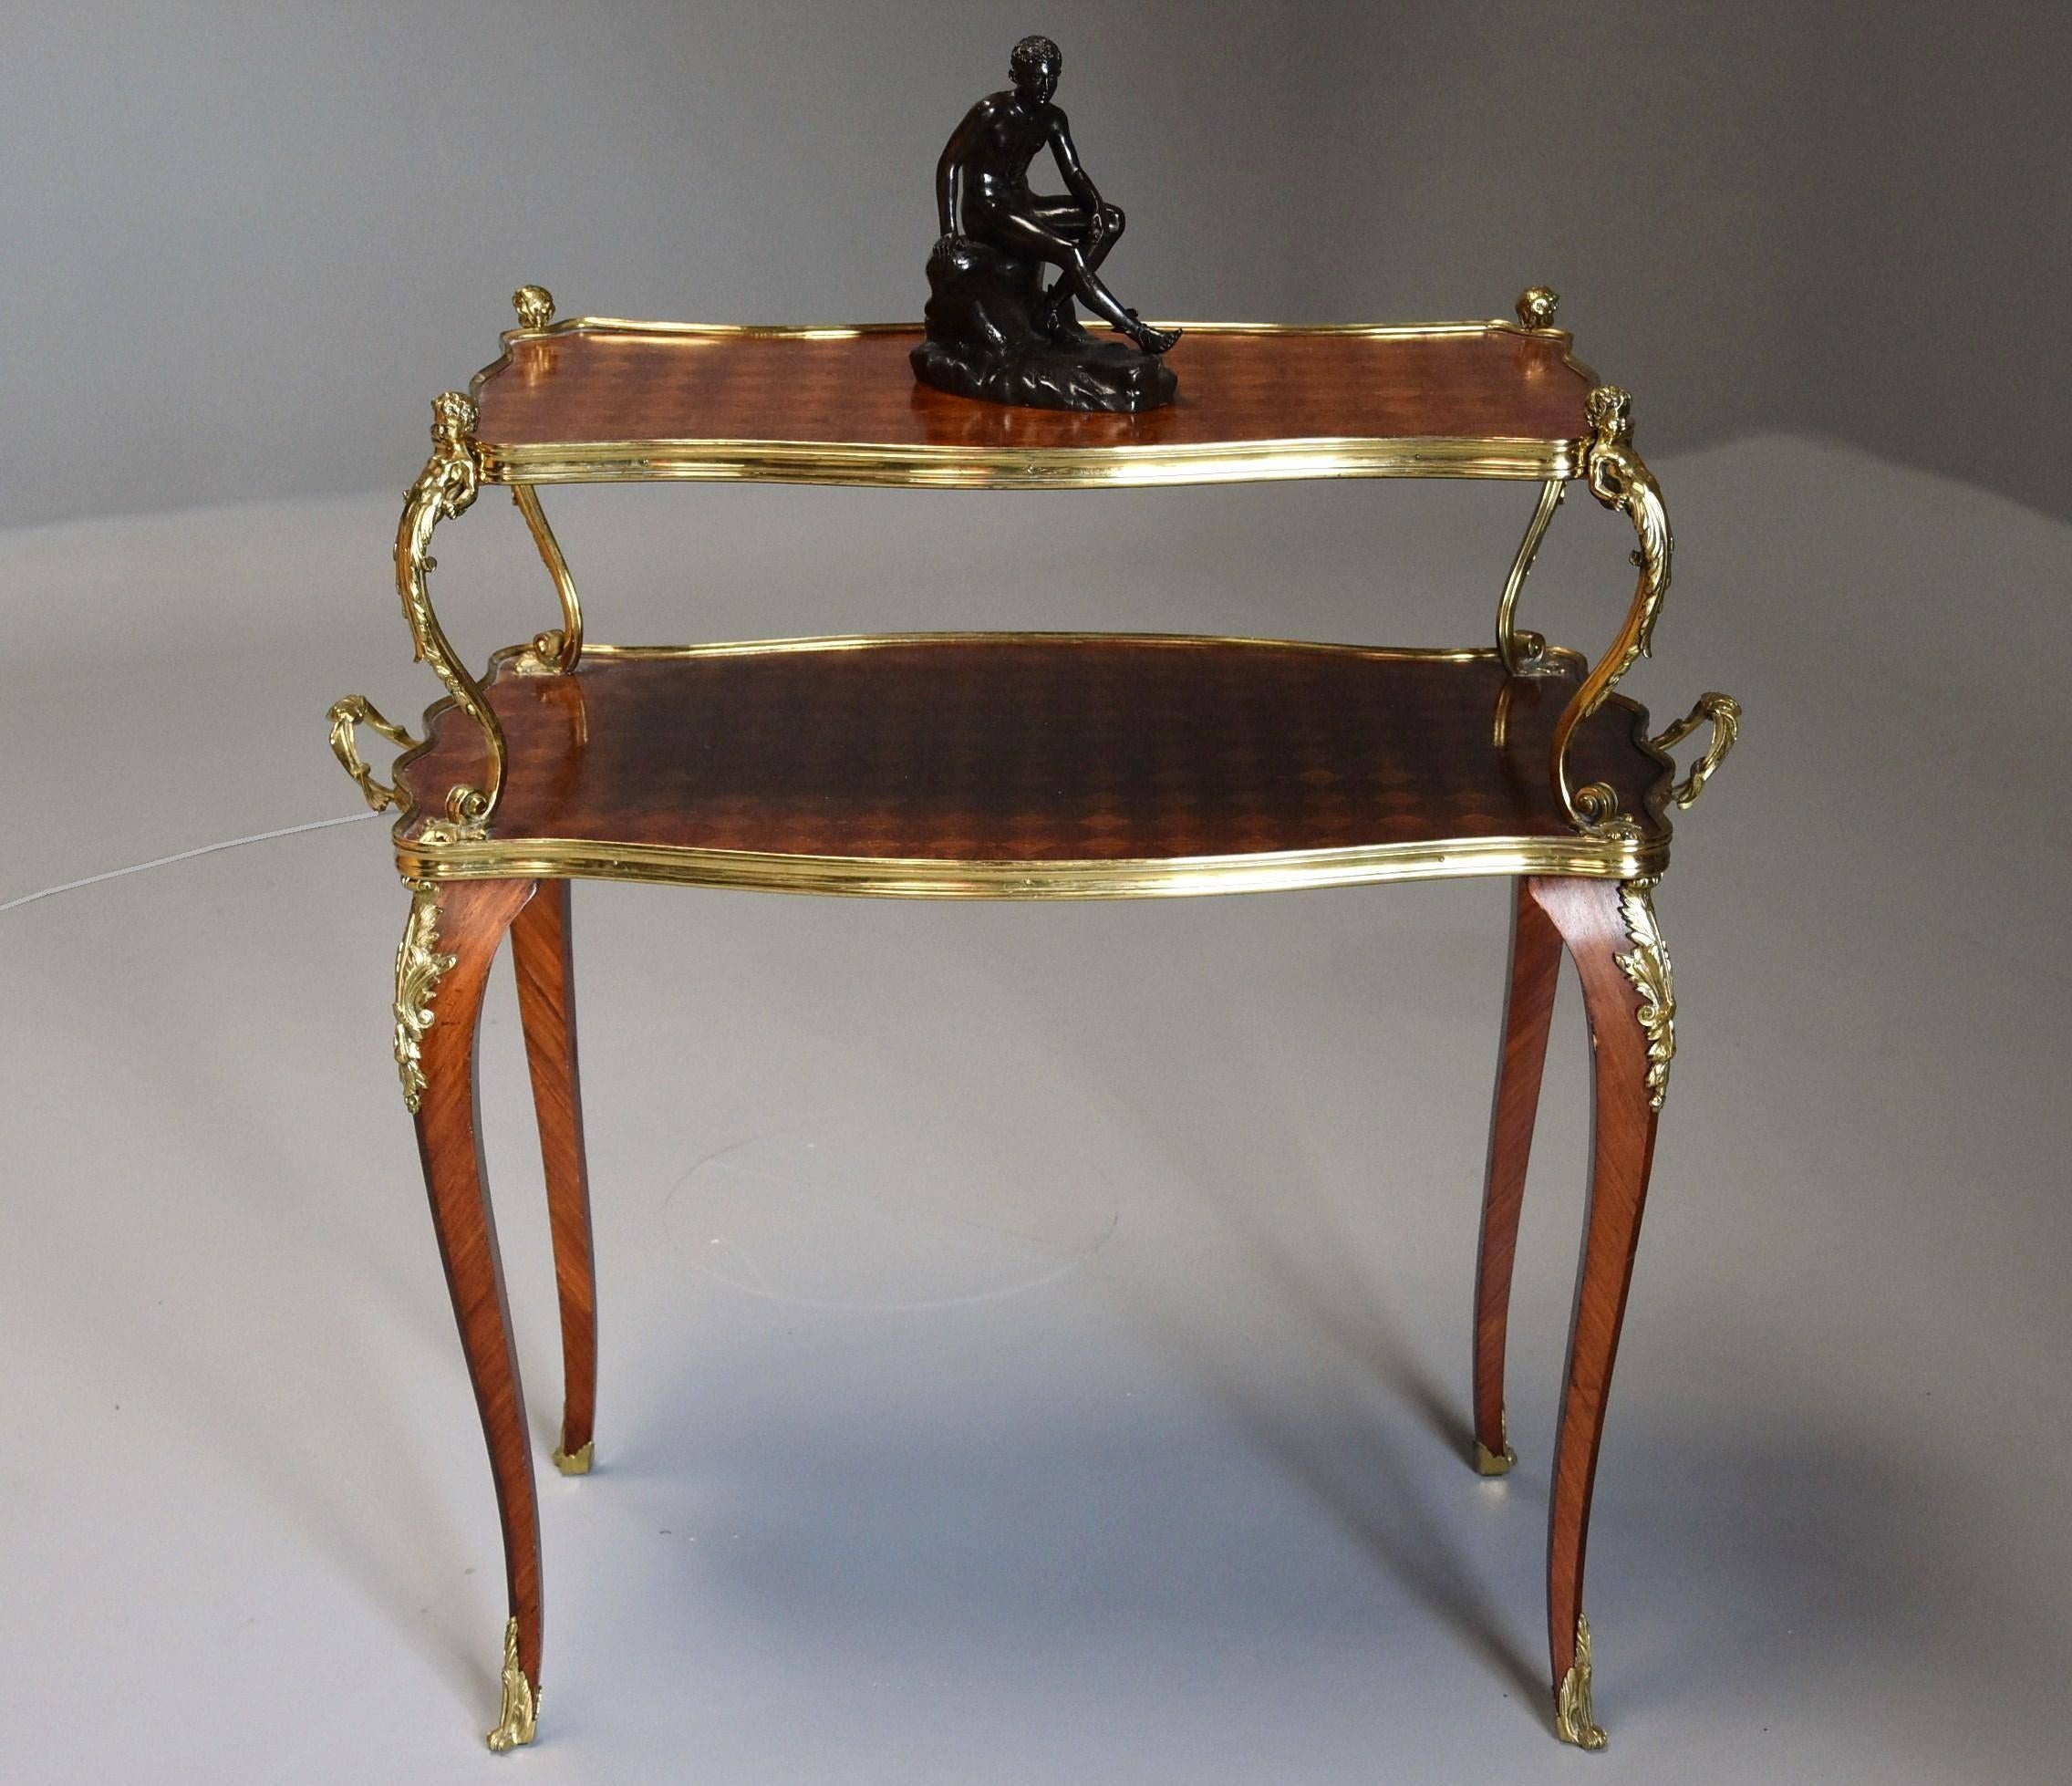 French 19th Century Kingwood Two-Tier Parquetry Serpentine Shaped Etagere For Sale 1